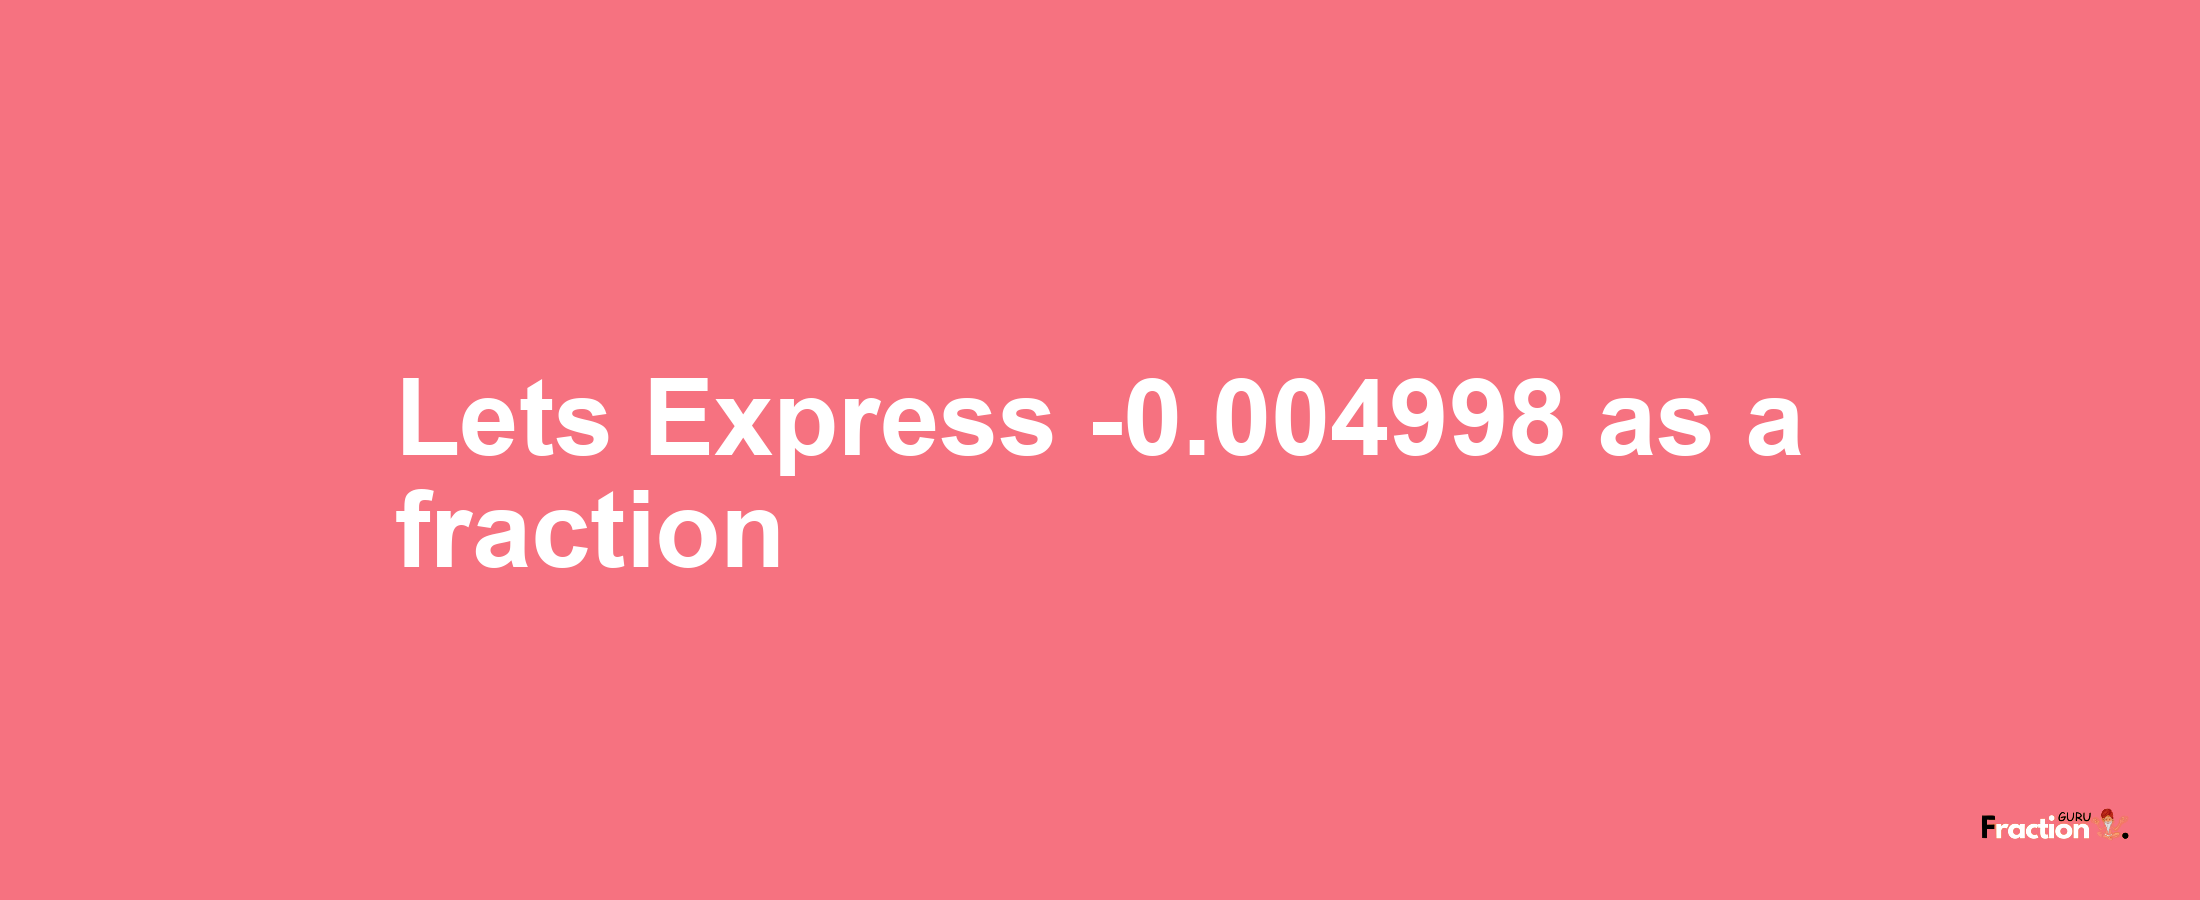 Lets Express -0.004998 as afraction